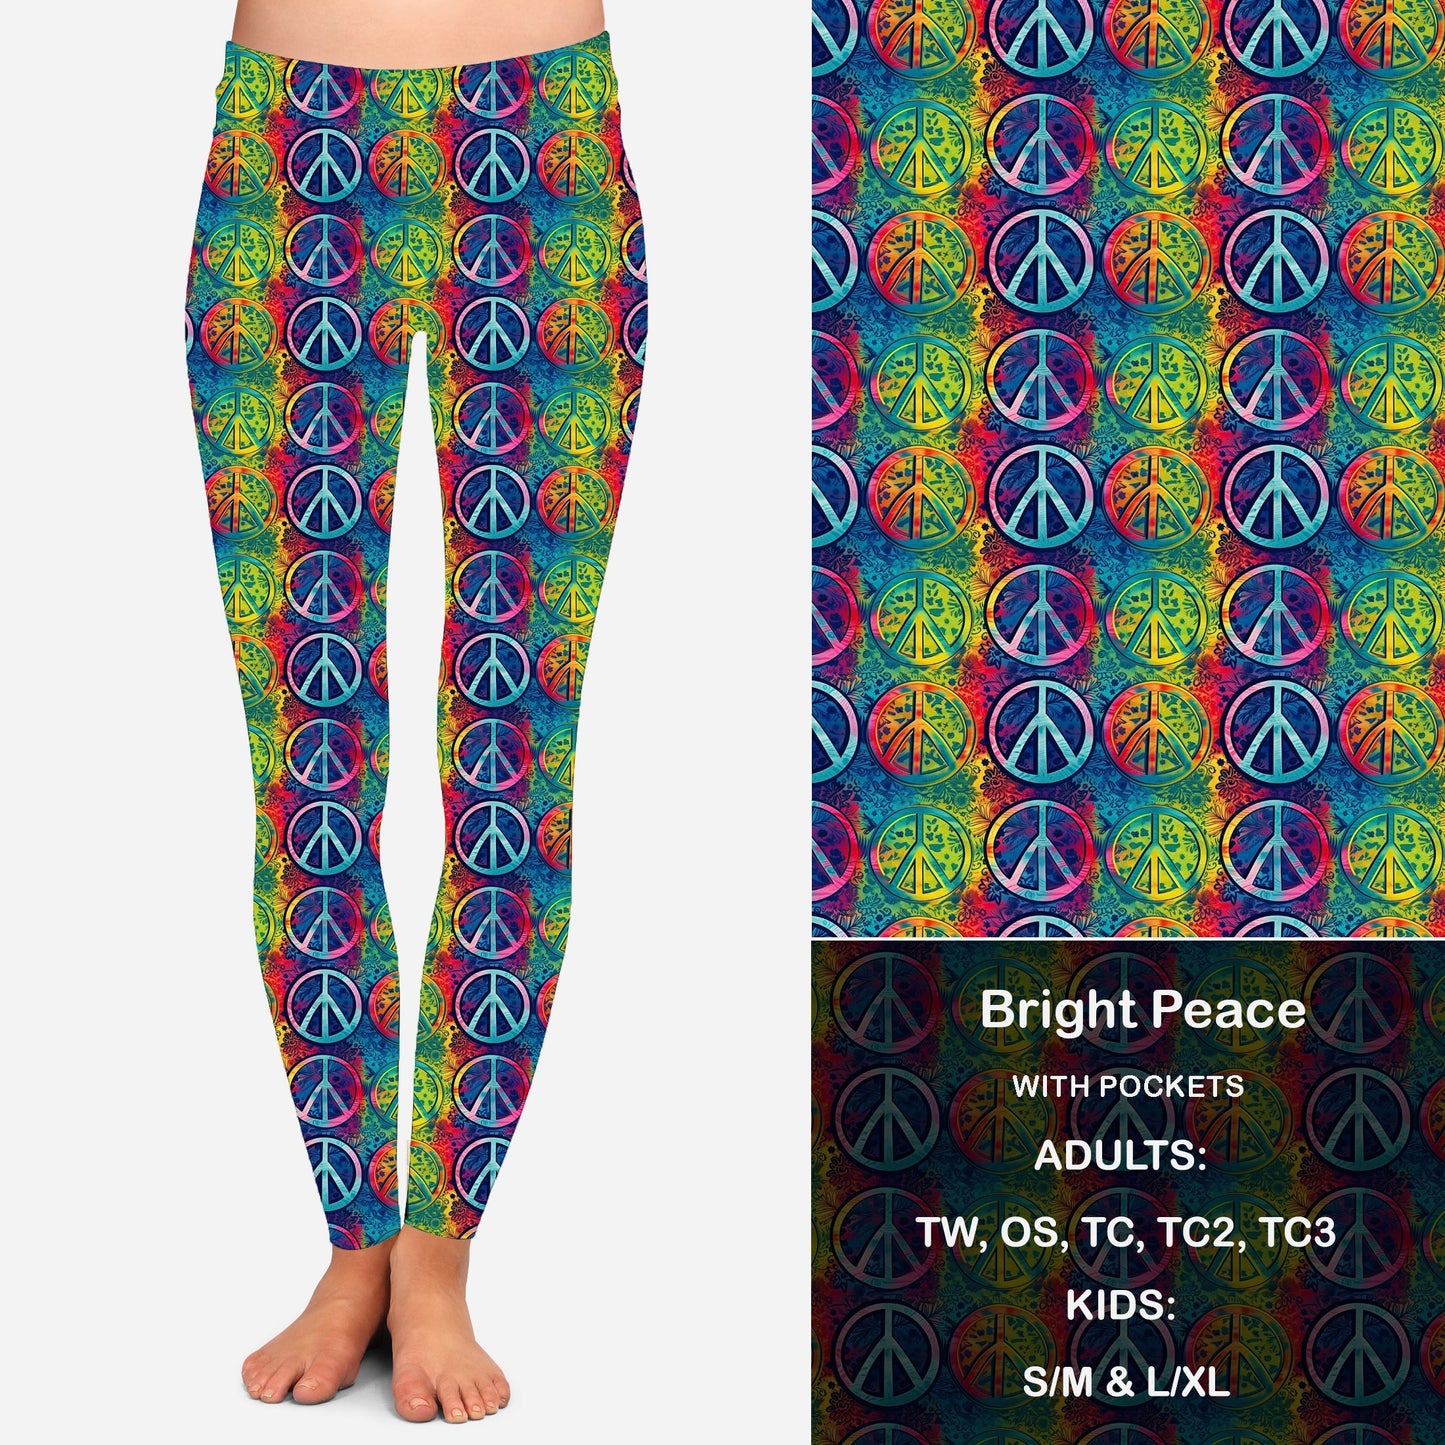 Bright Peace Leggings with Pockets